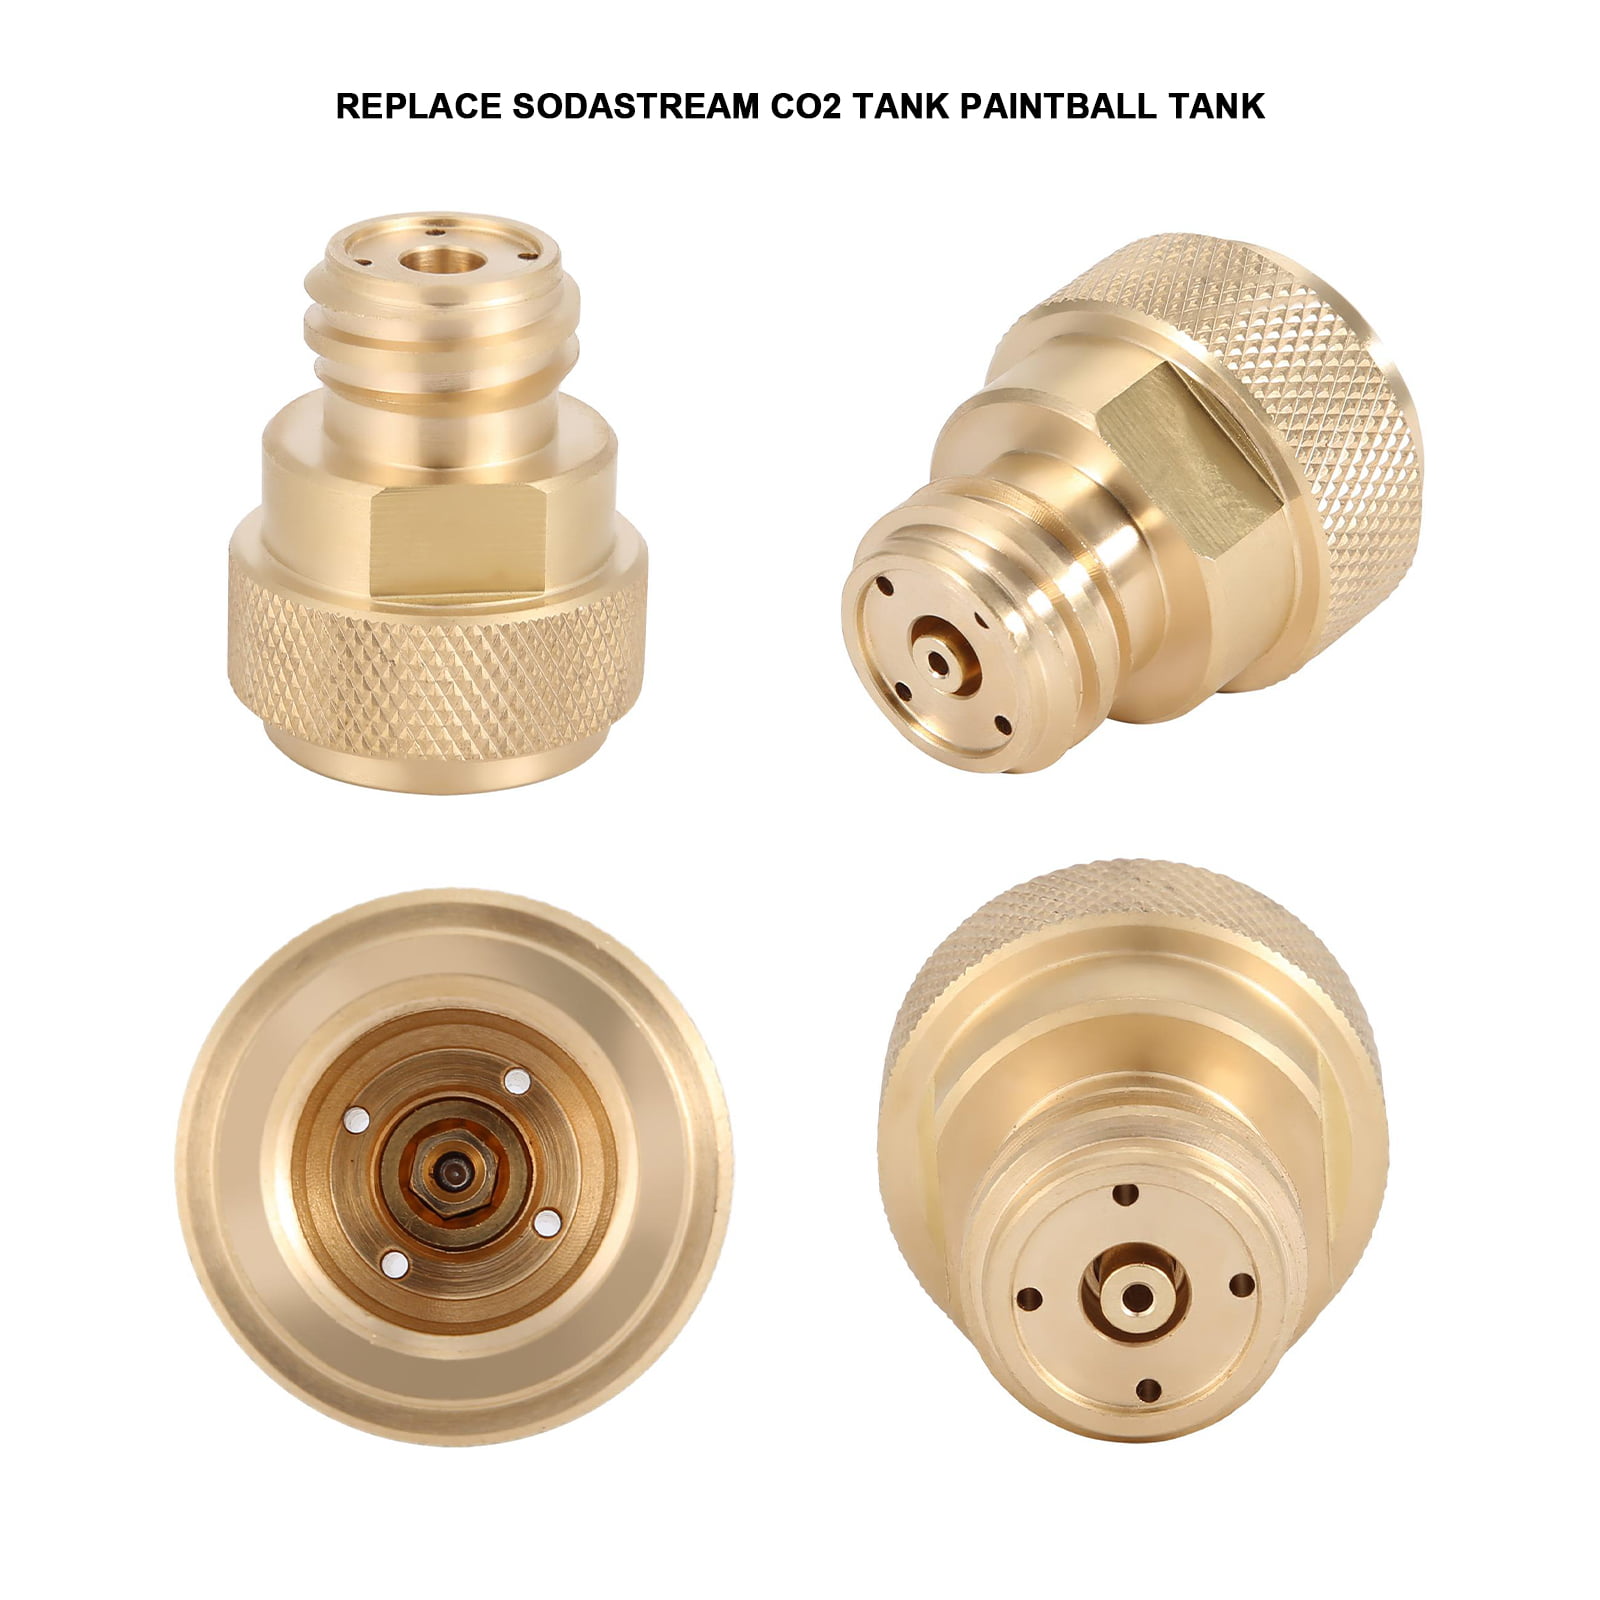 Details about   CO2 Tank Paintball Canister Refill Adapter Conversion Replace for SodaStream  * 